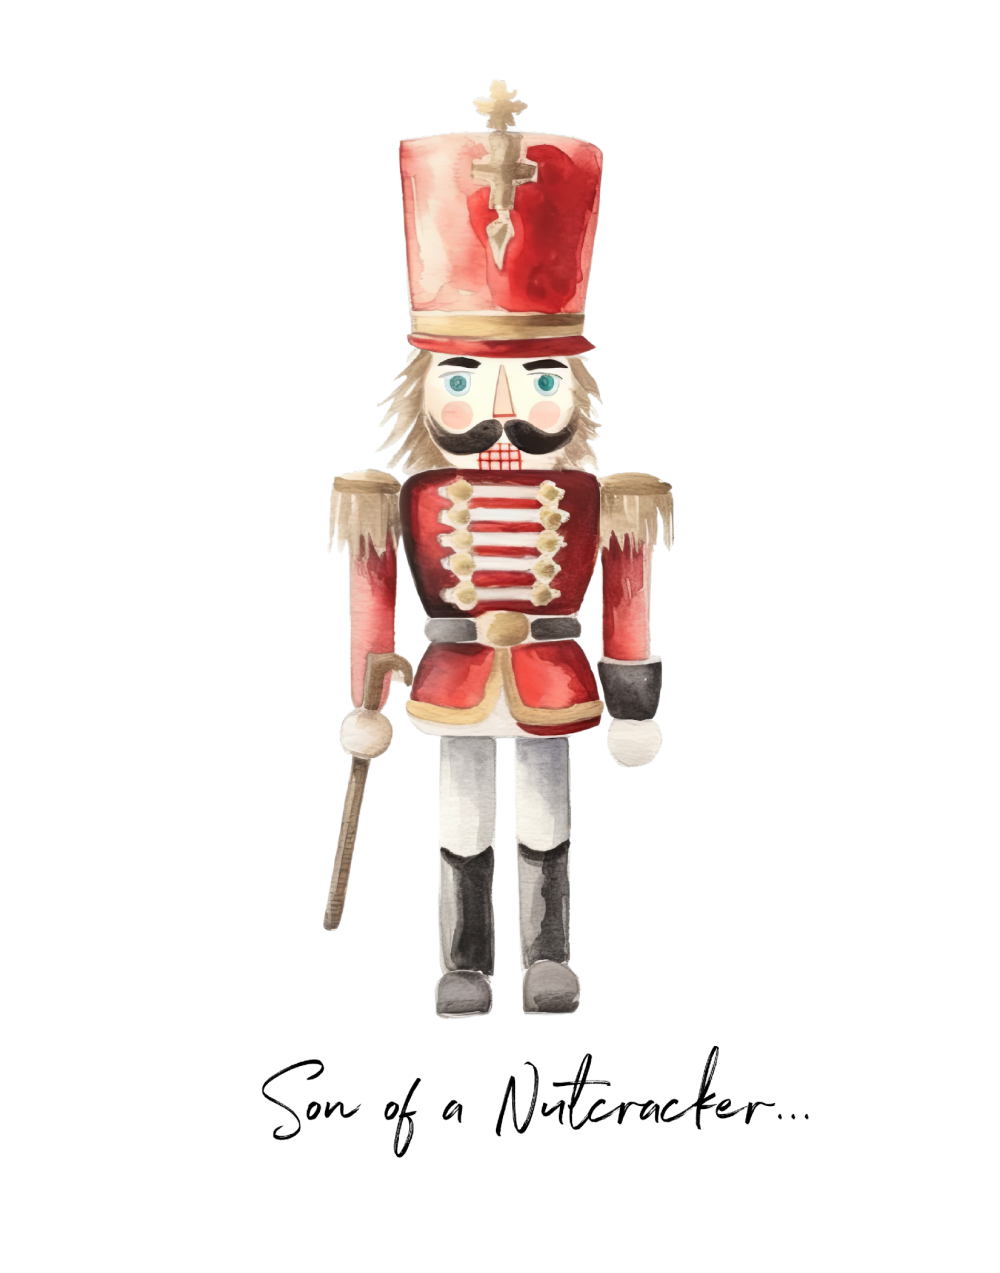 Watercolor Nutcracker with "Son of a Nutcracker" quote from Elf.